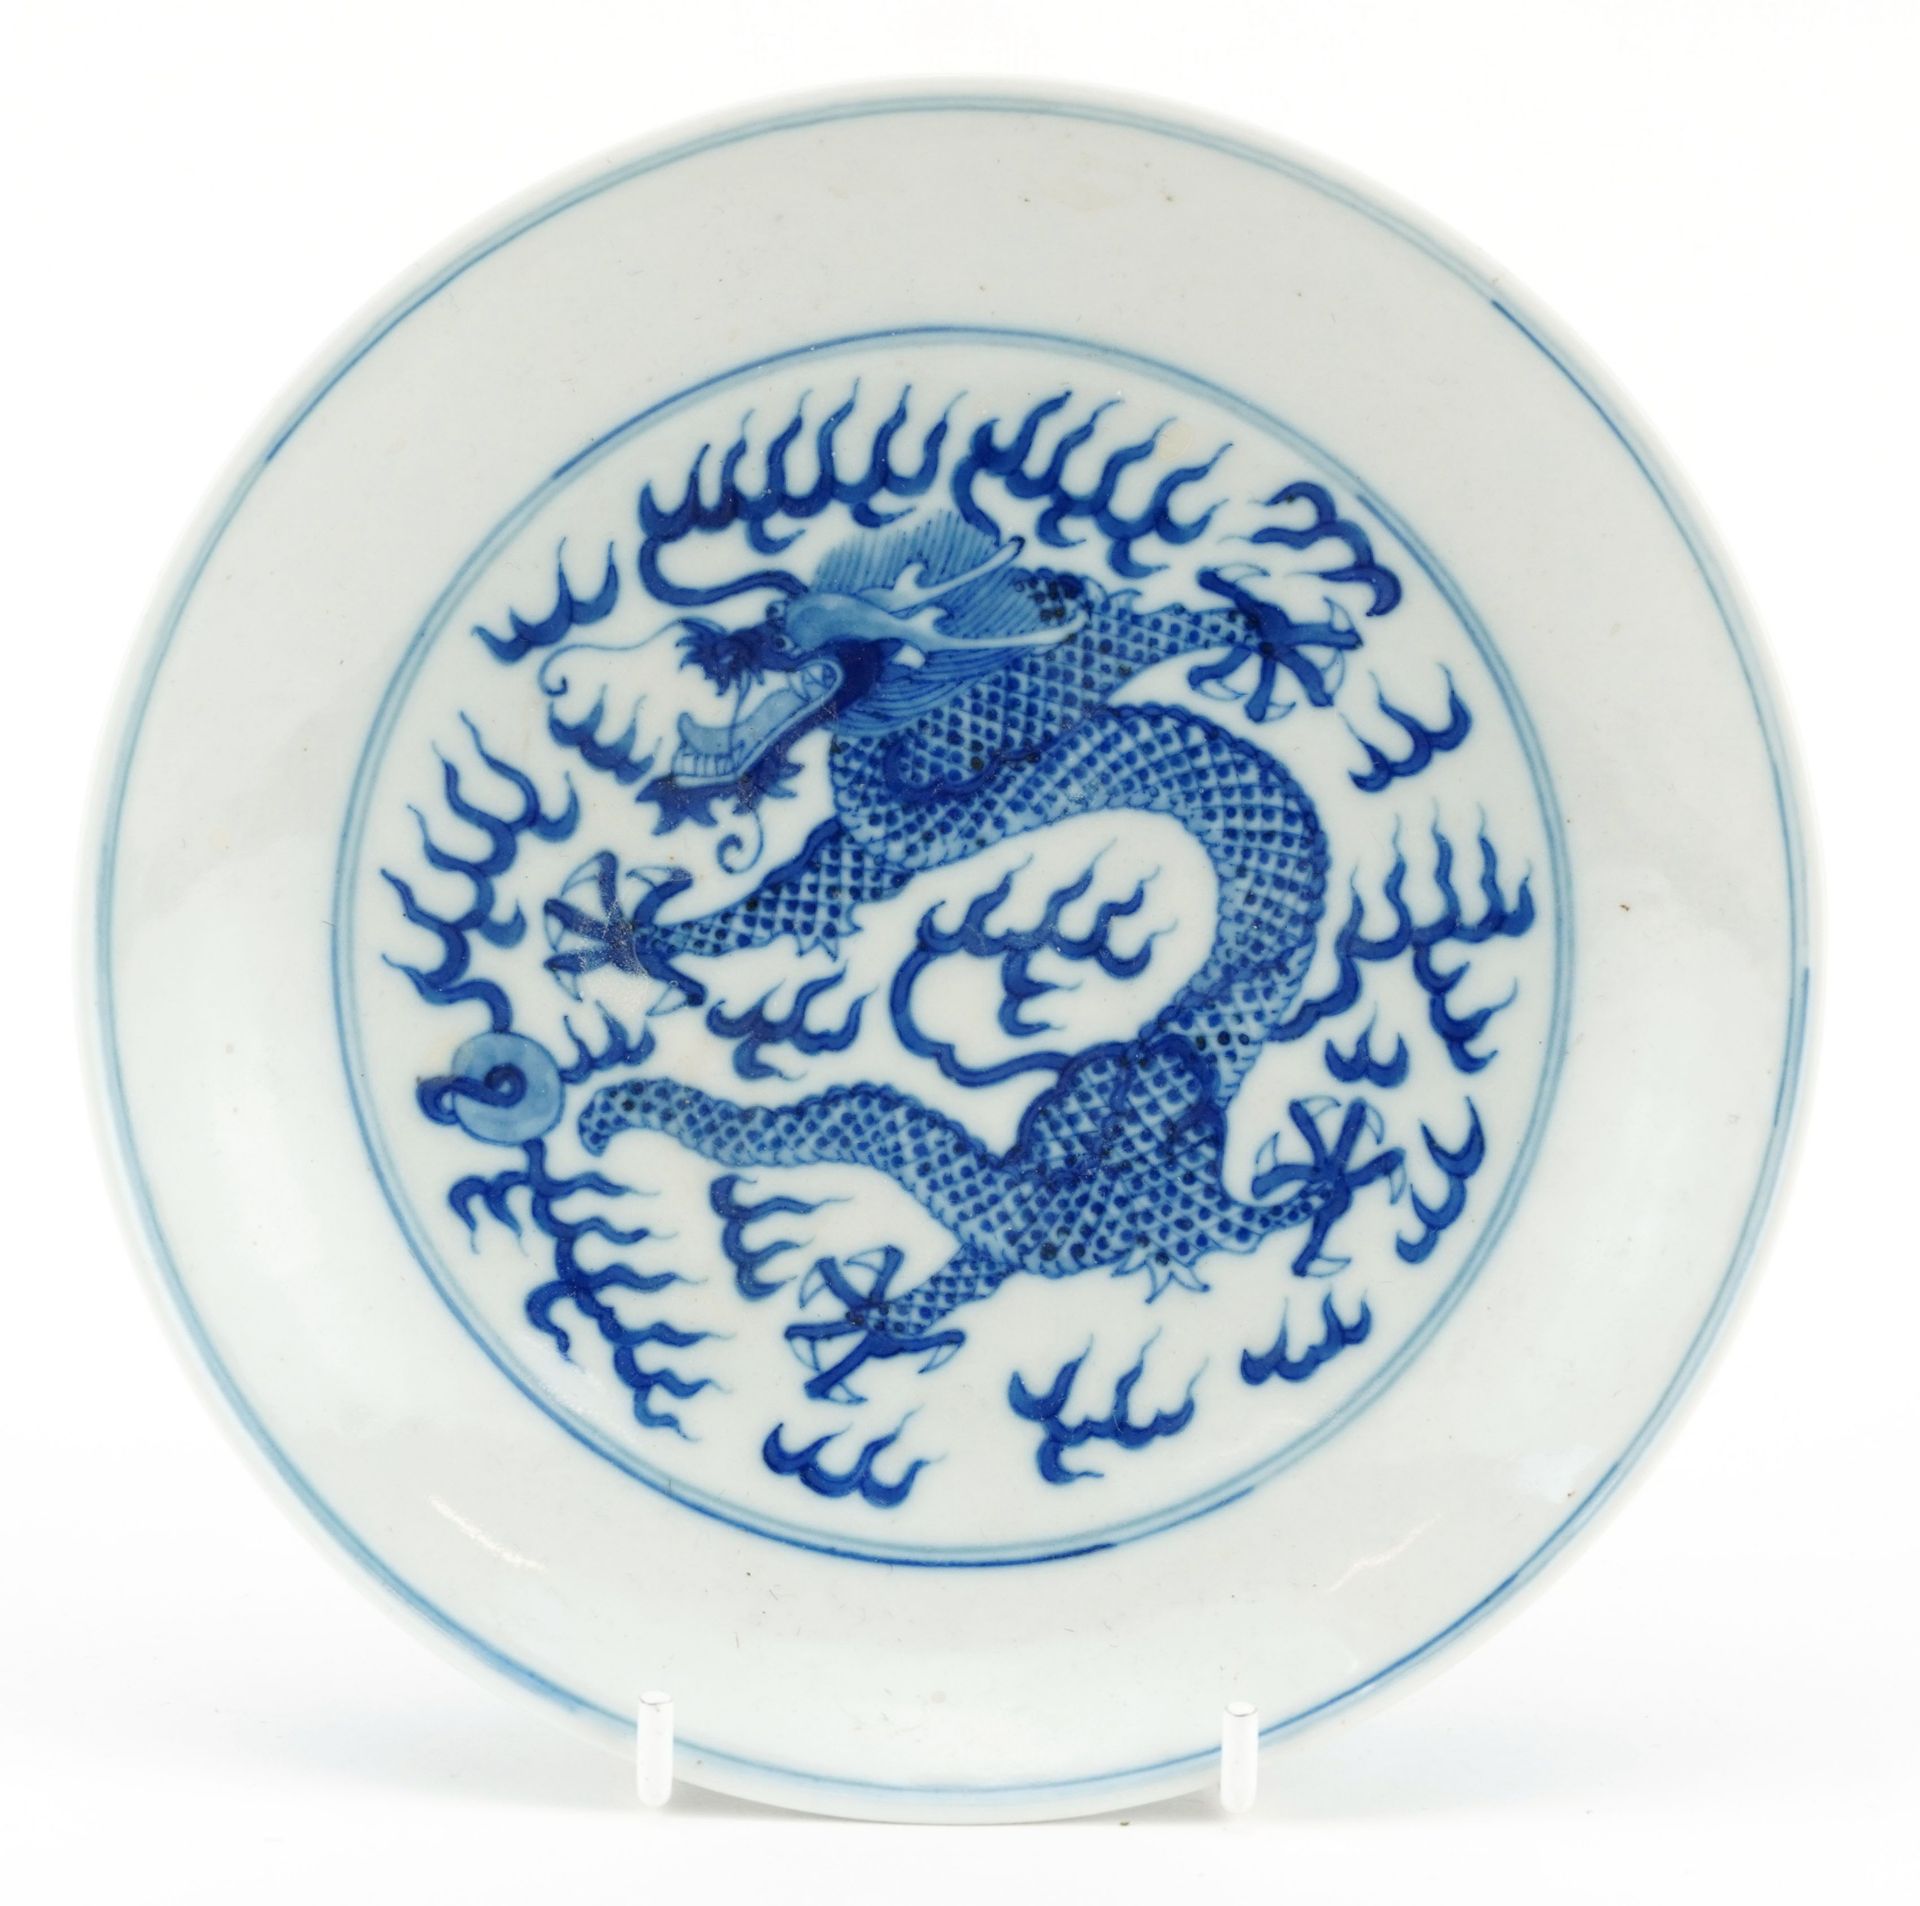 Chinese blue and white porcelain plate hand painted with dragons chasing the flaming pearl amongst